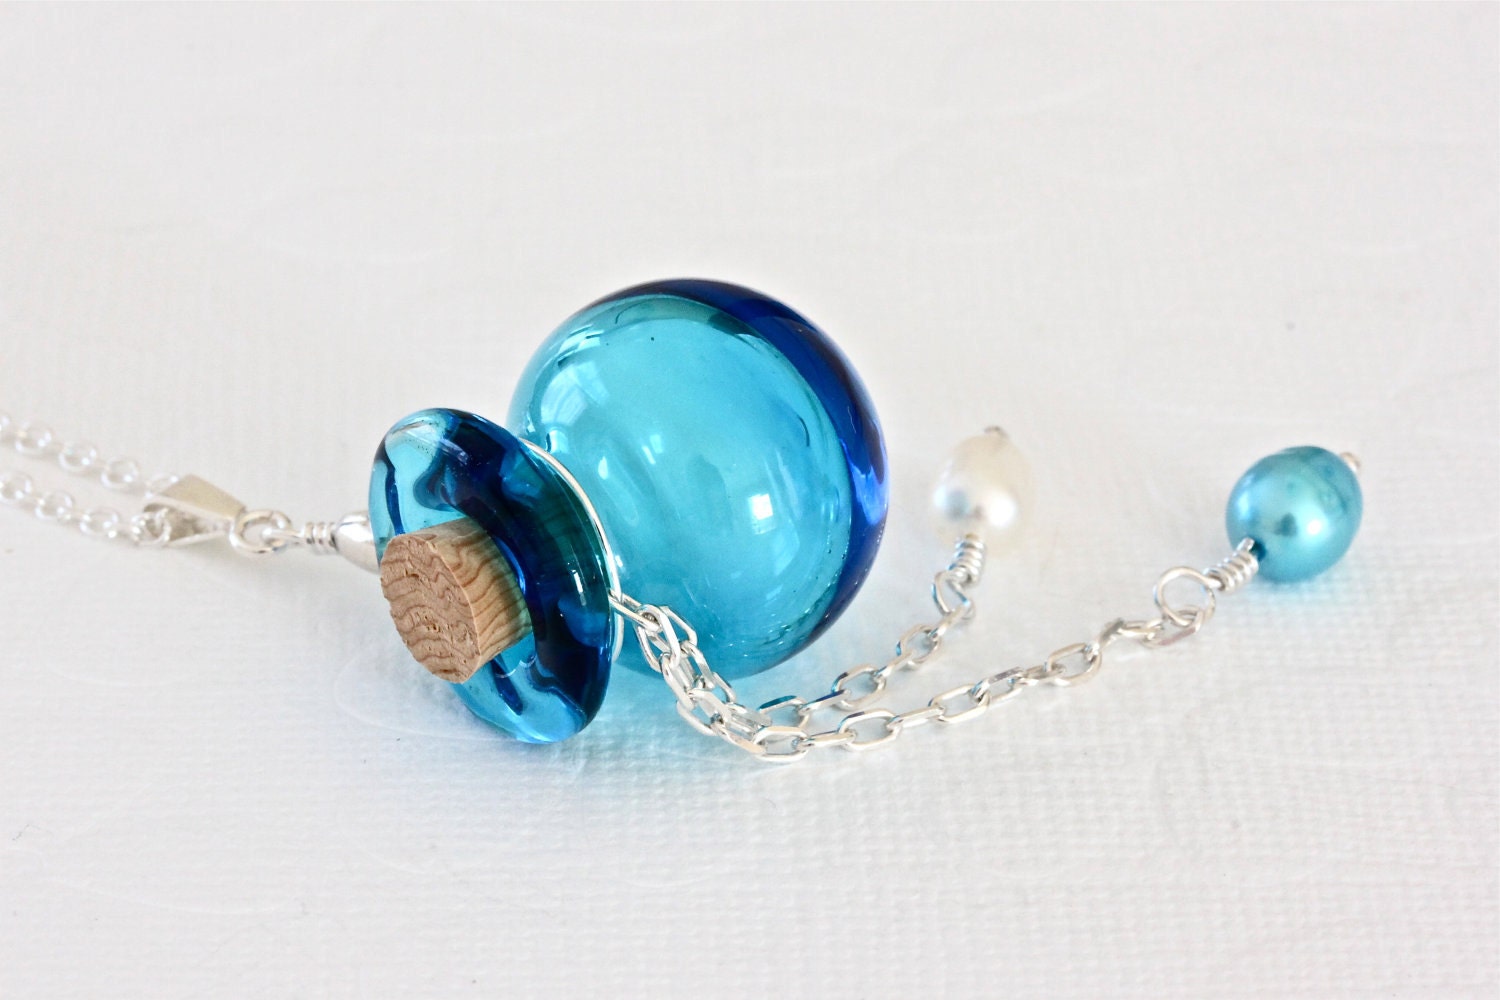 Glass Pendant Necklace, Blue Perfume Bottle Necklace, Murano Glass Jewelry - ThePassionatePearl